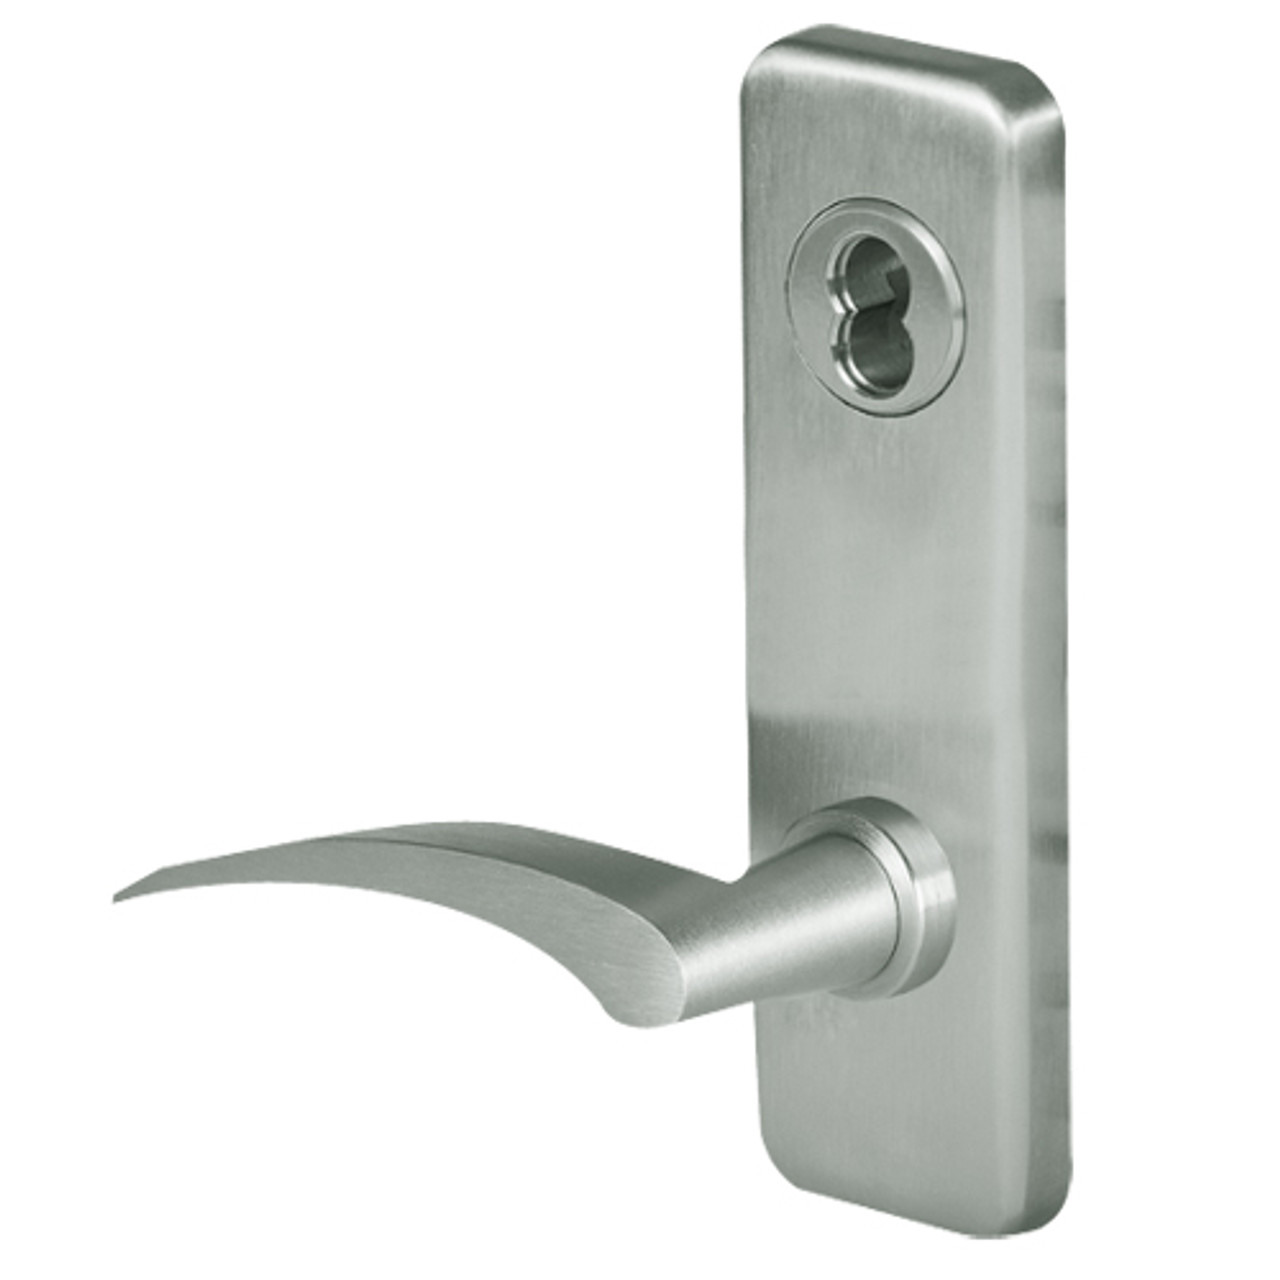 45H7HJ17RJ619 Best 40H Series Hotel with Deadbolt Heavy Duty Mortise Lever Lock with Gull Wing RH in Satin Nickel